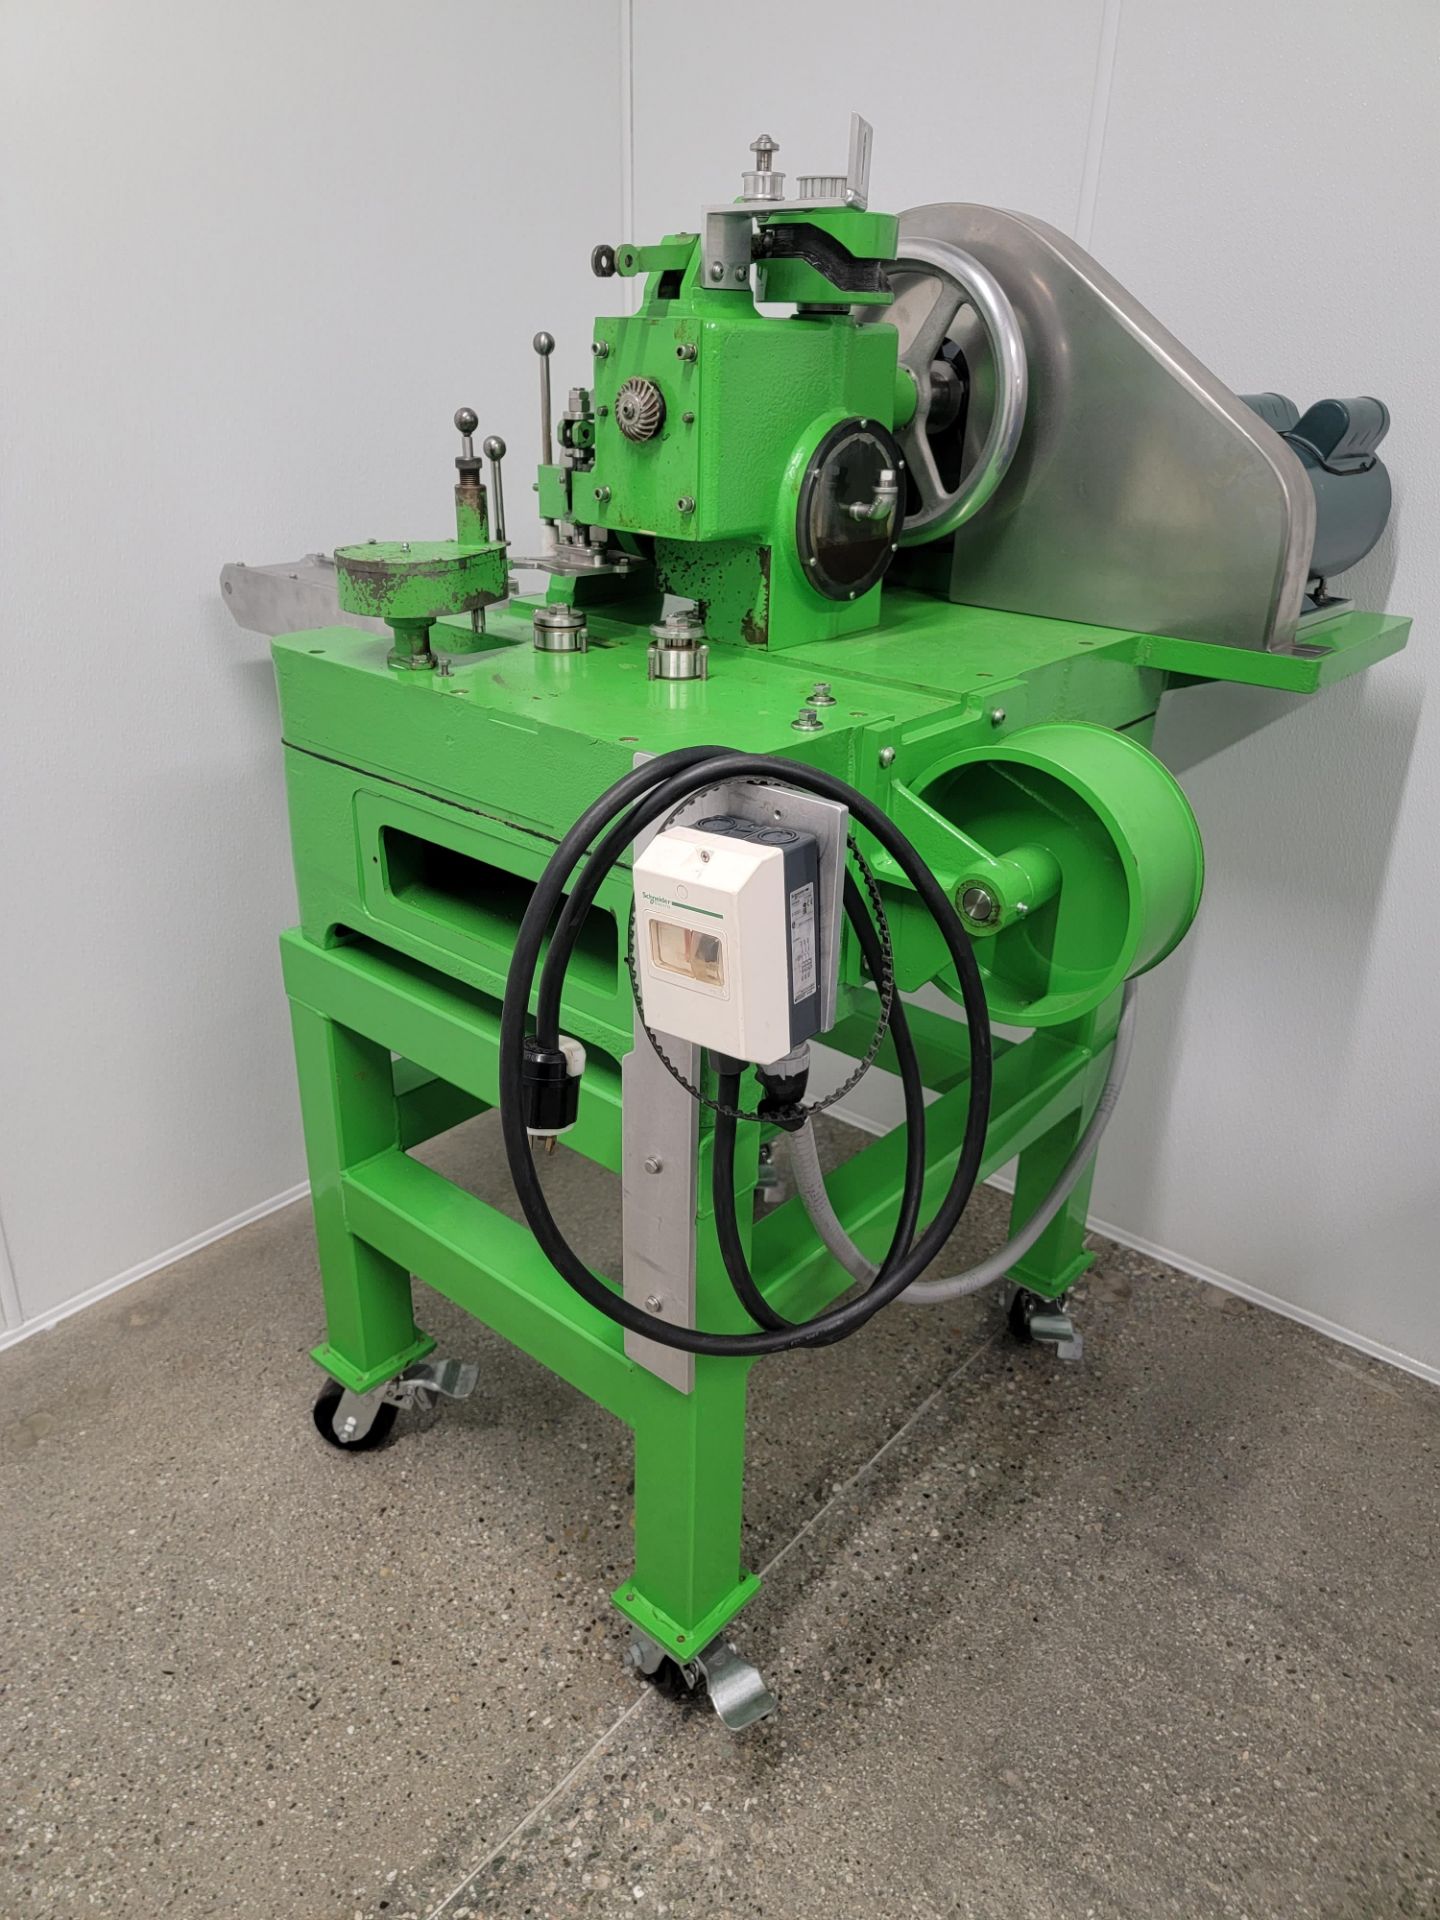 COLTON SINGLE PUNCH TABLET PRESS (TRITULATOR) GREEN - Image 2 of 5